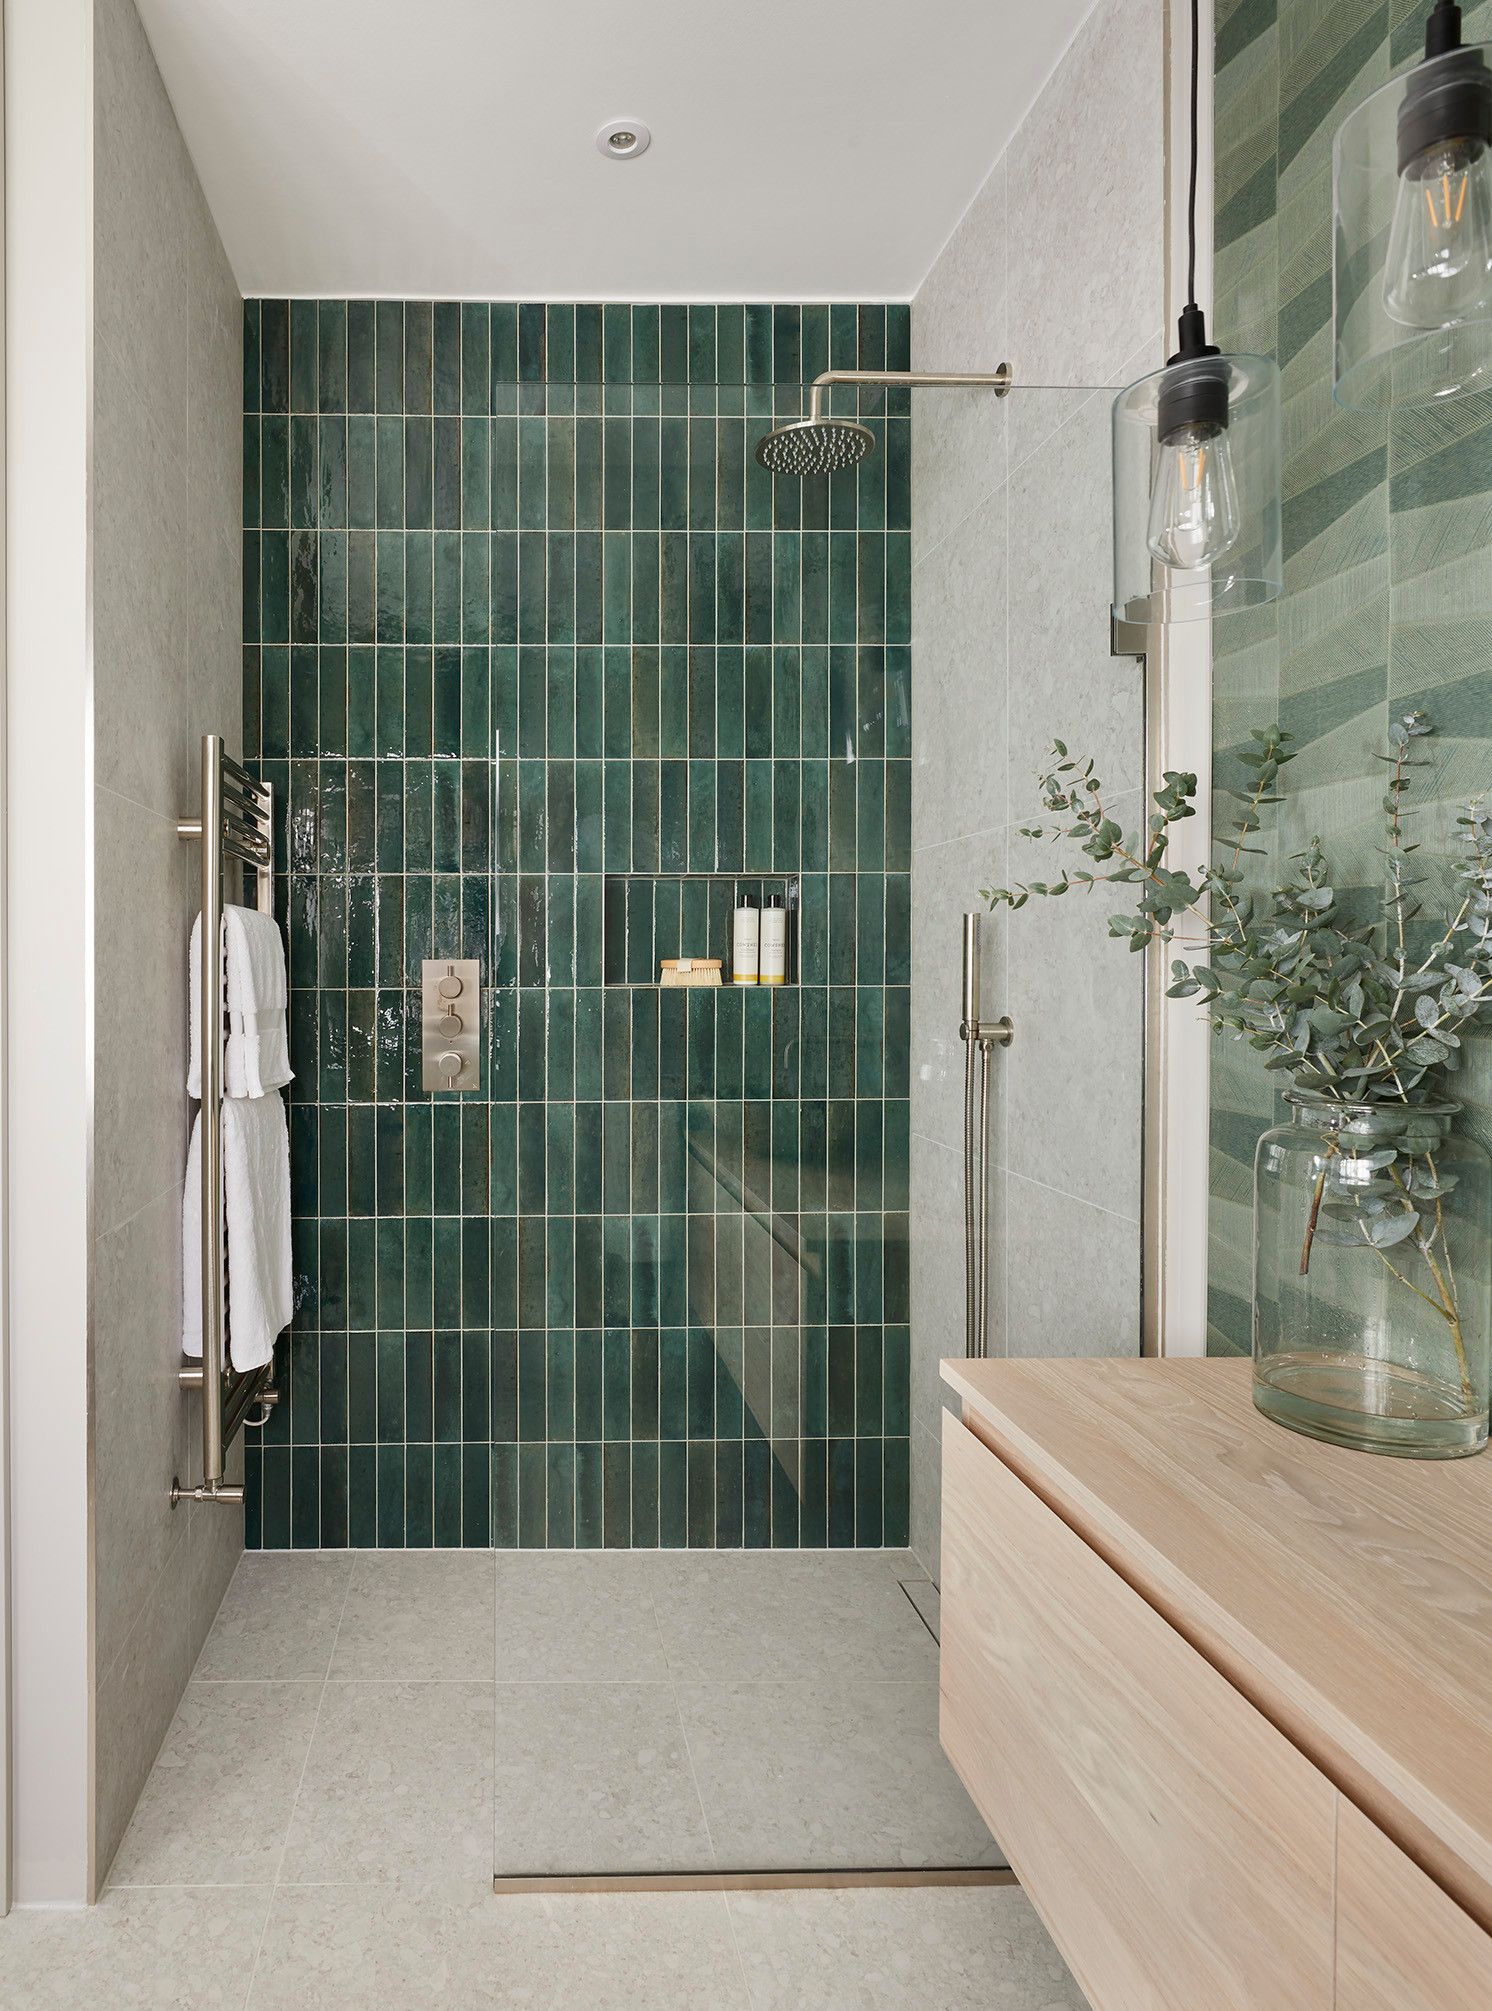 Shower Designs For Bathroom Upgrade Your Bathroom with Stylish Shower Options